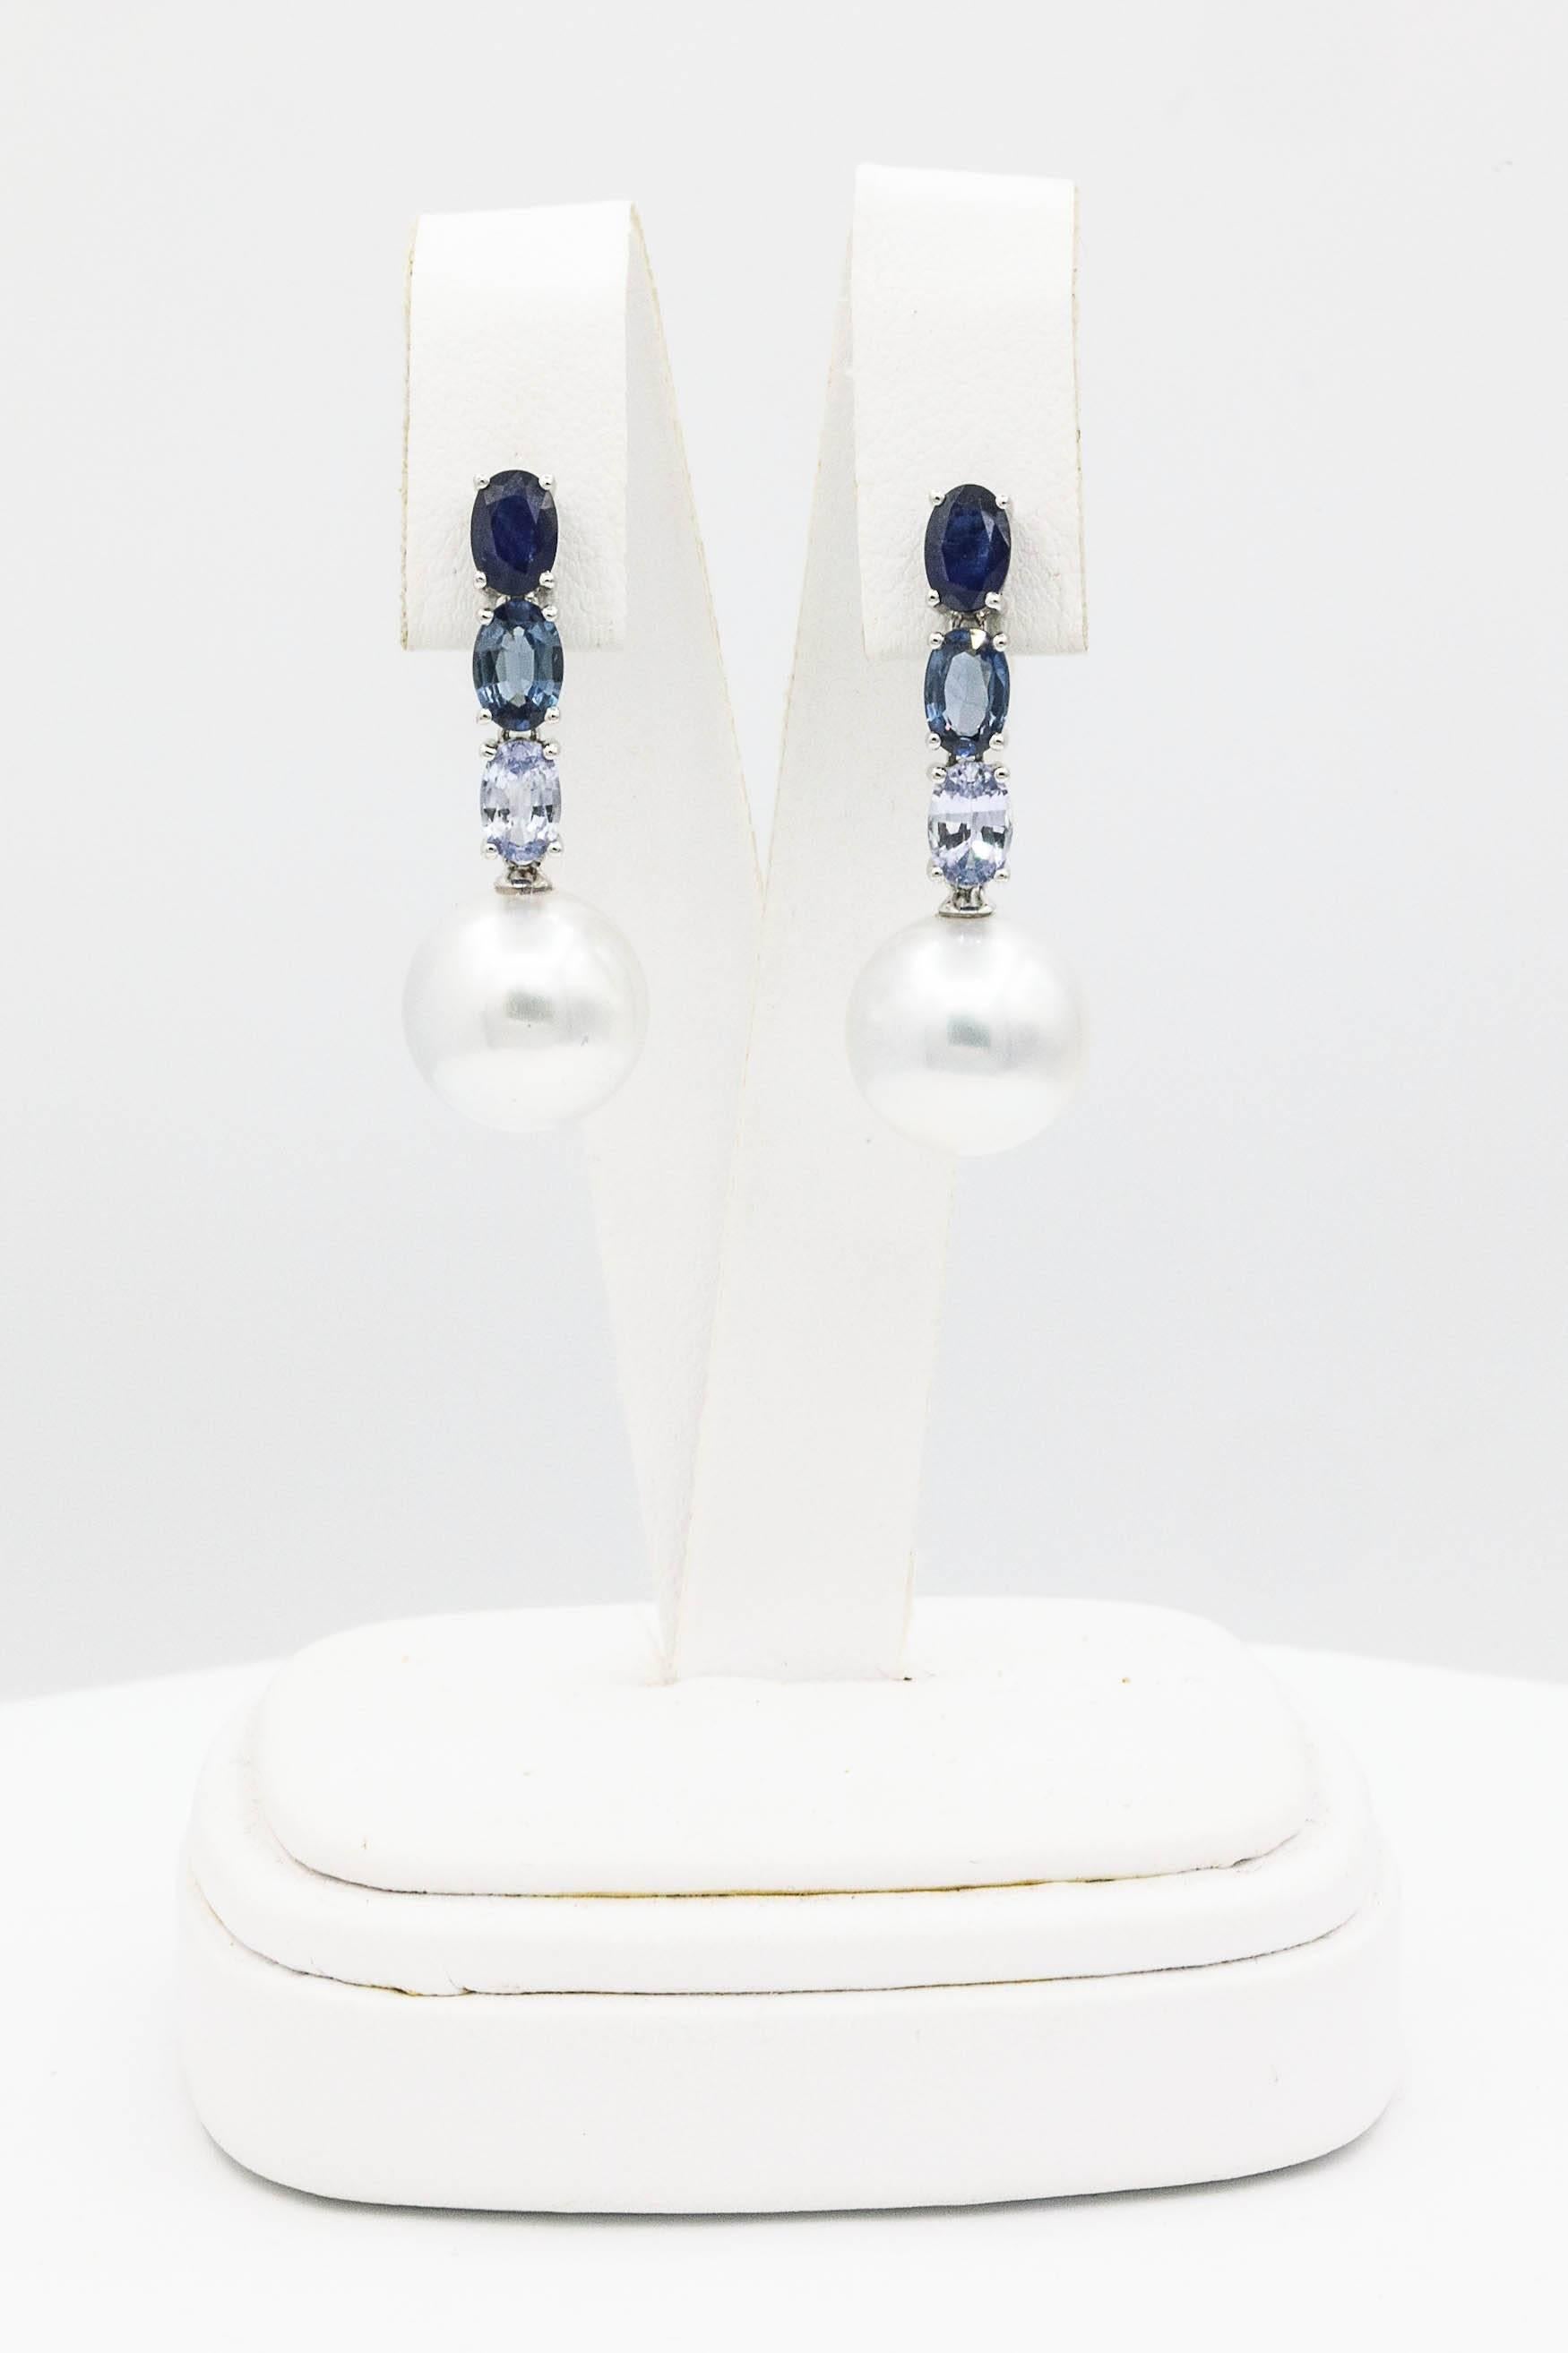 18K White gold drop earrings featuring 6 oval Sapphires weighing 3.00 carats and two South Sea Pearls measuring 11-12 mm.